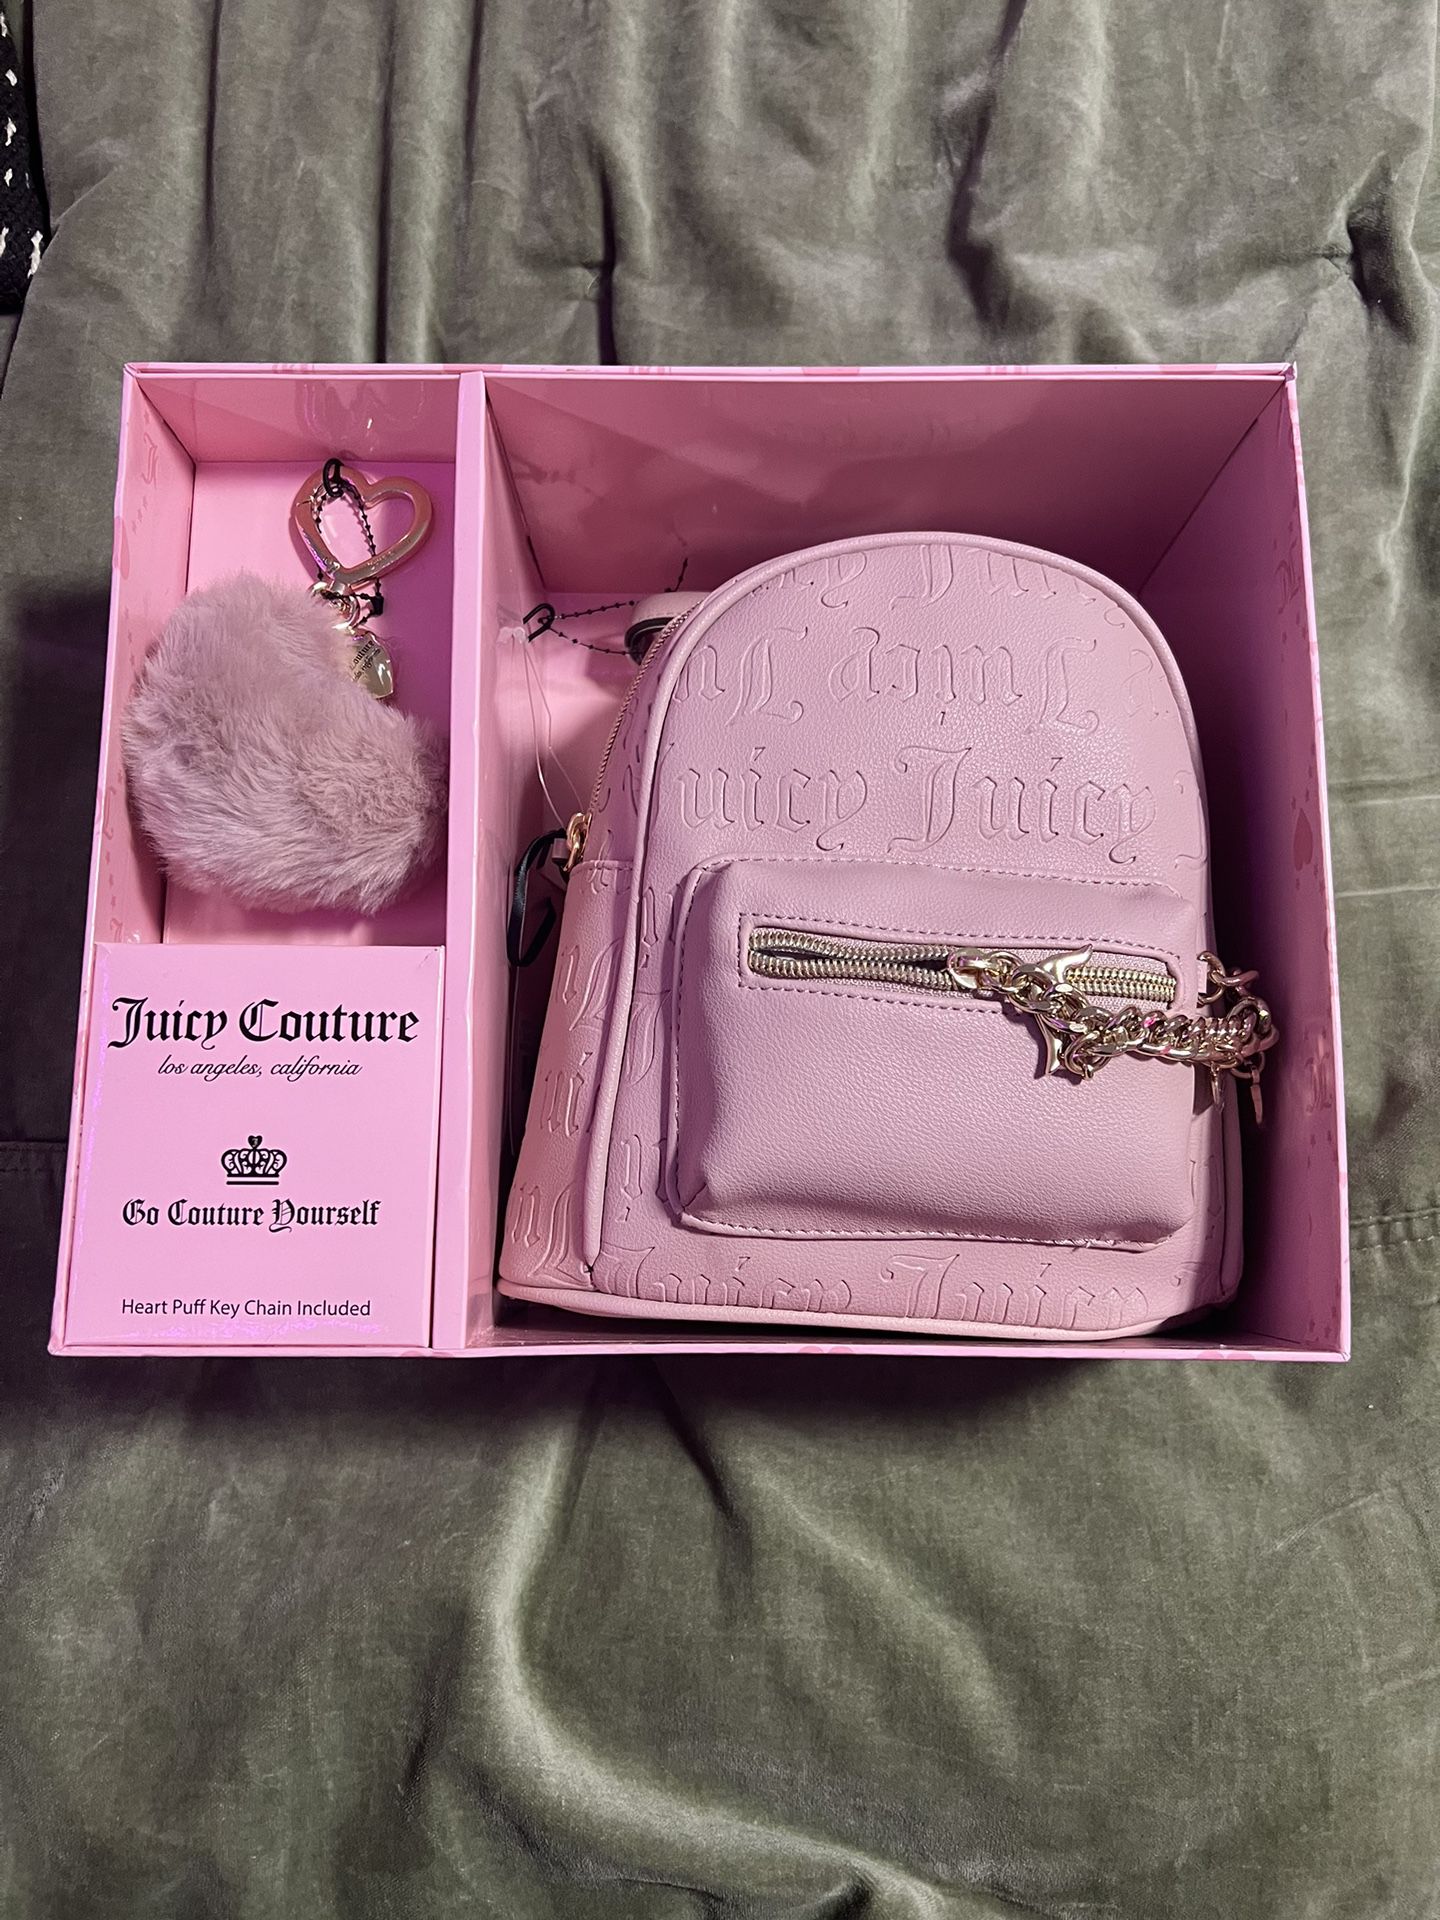 NWT Juicy couture mini backpack